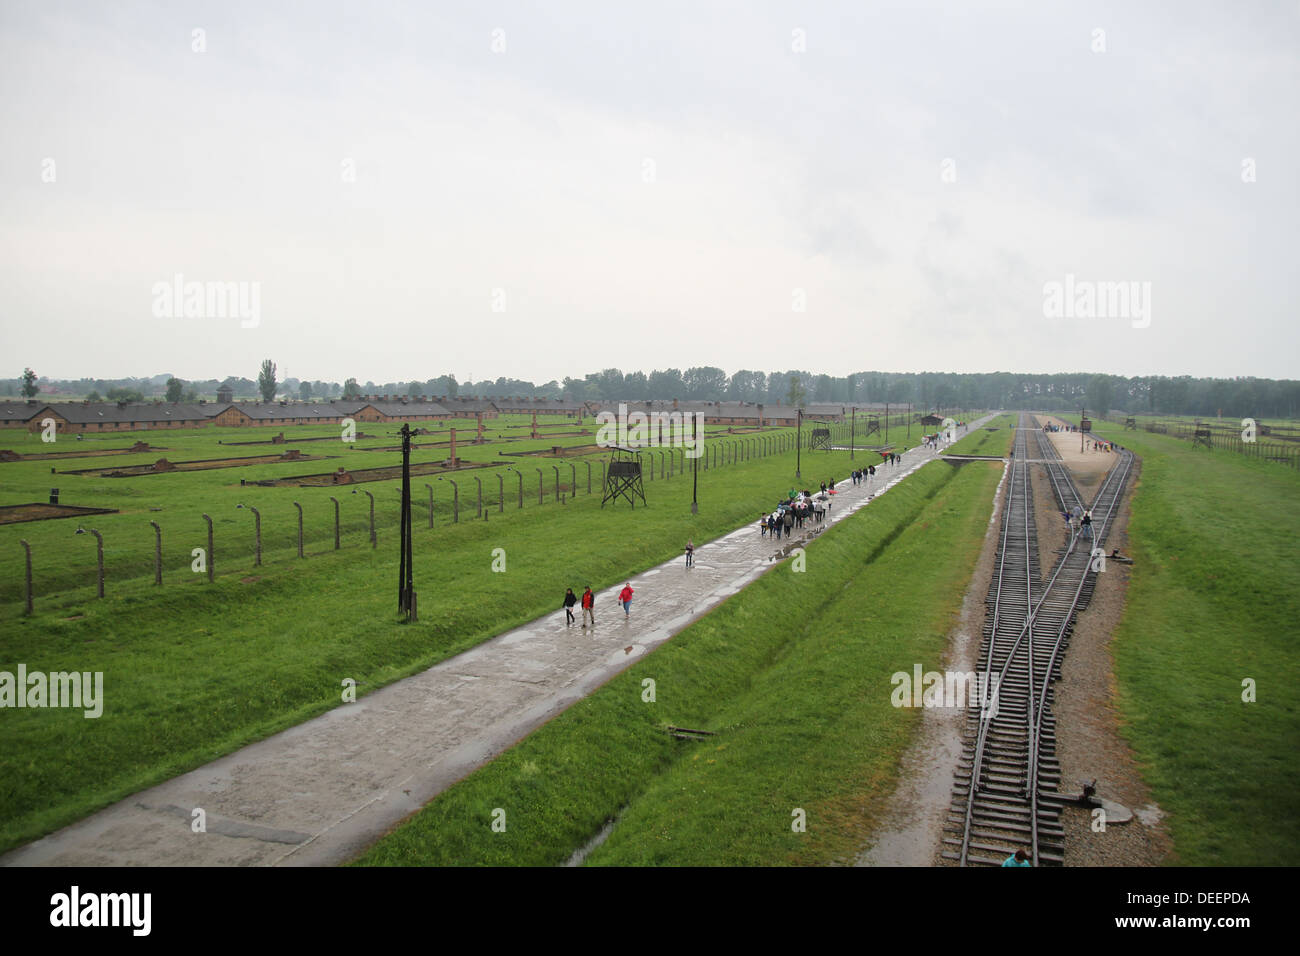 Looking at the train tracks at Auschwitz which were used to transport the victims. Stock Photo